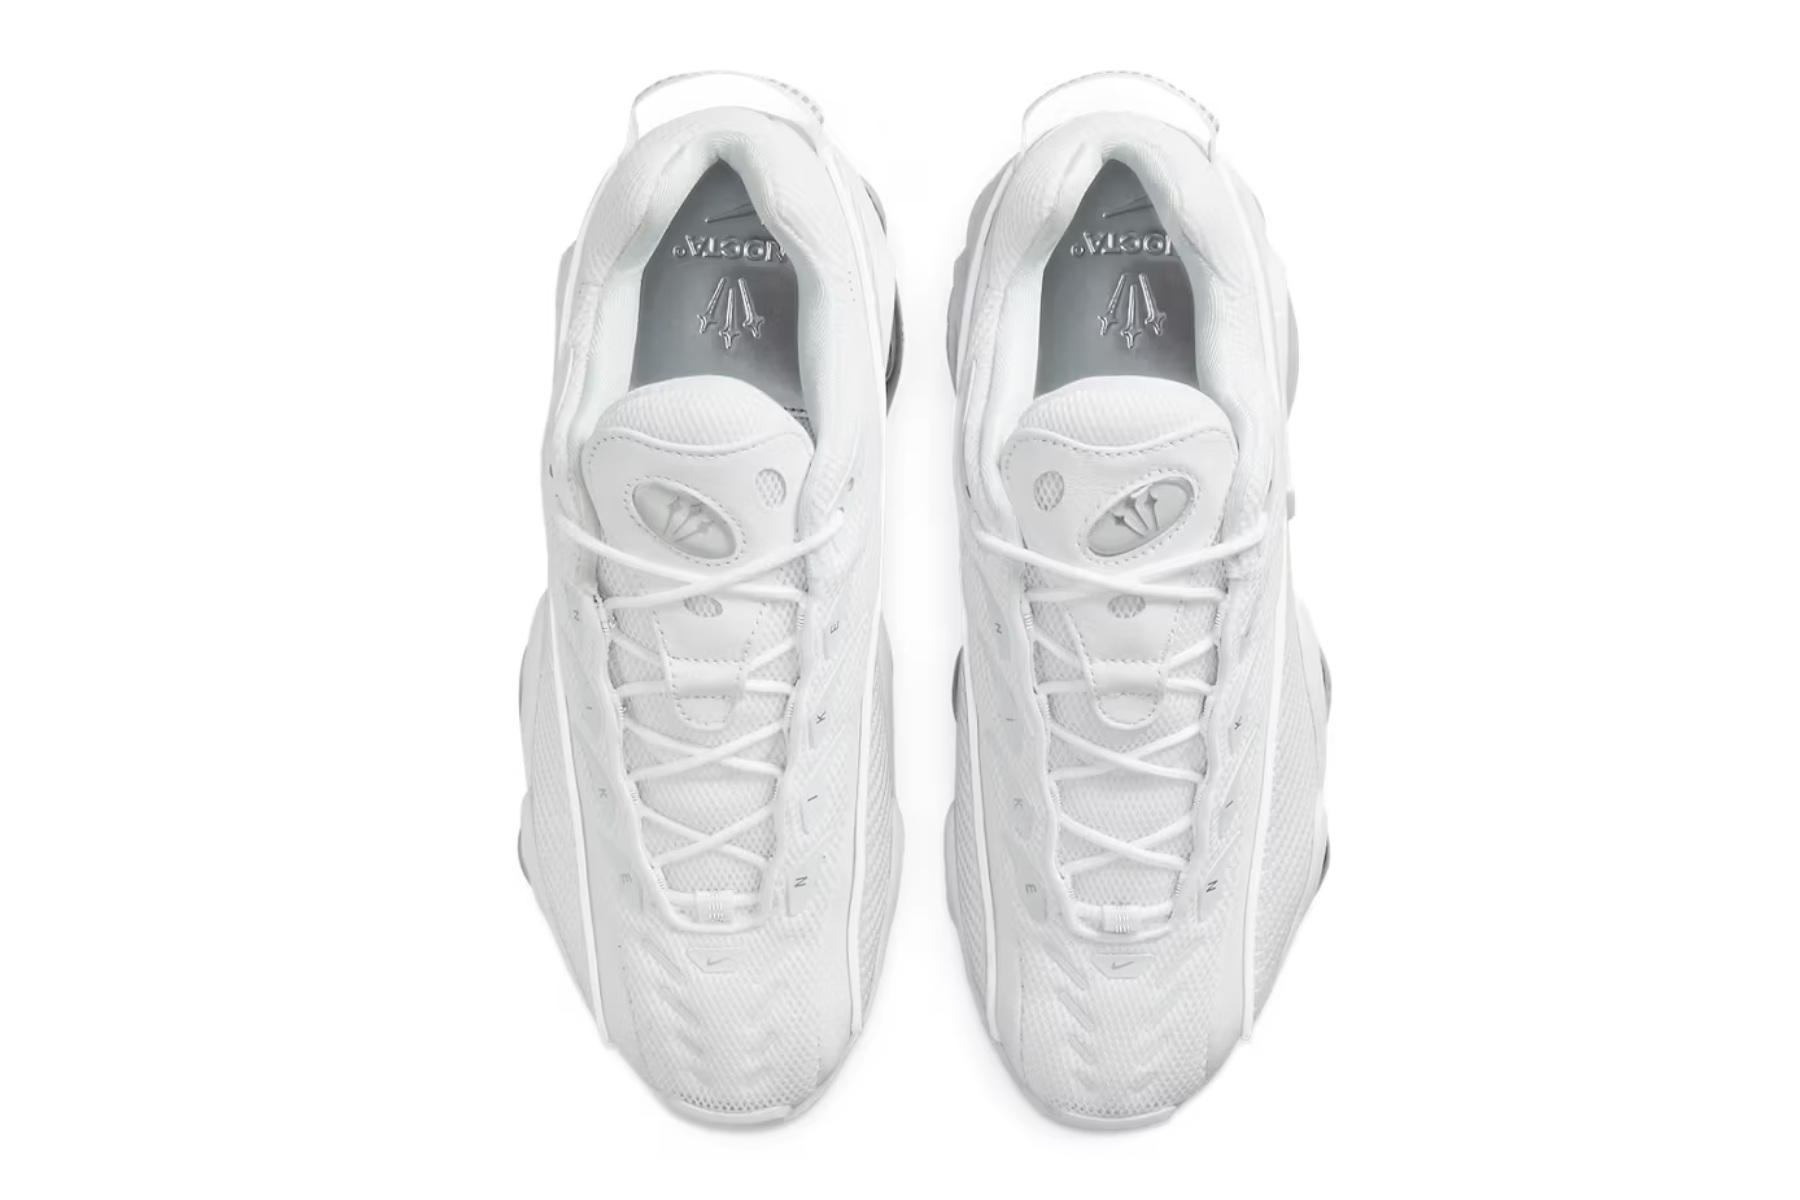 Drake's Nike NOCTA Glide looks to be dropping in a "White Chrome" colorway.